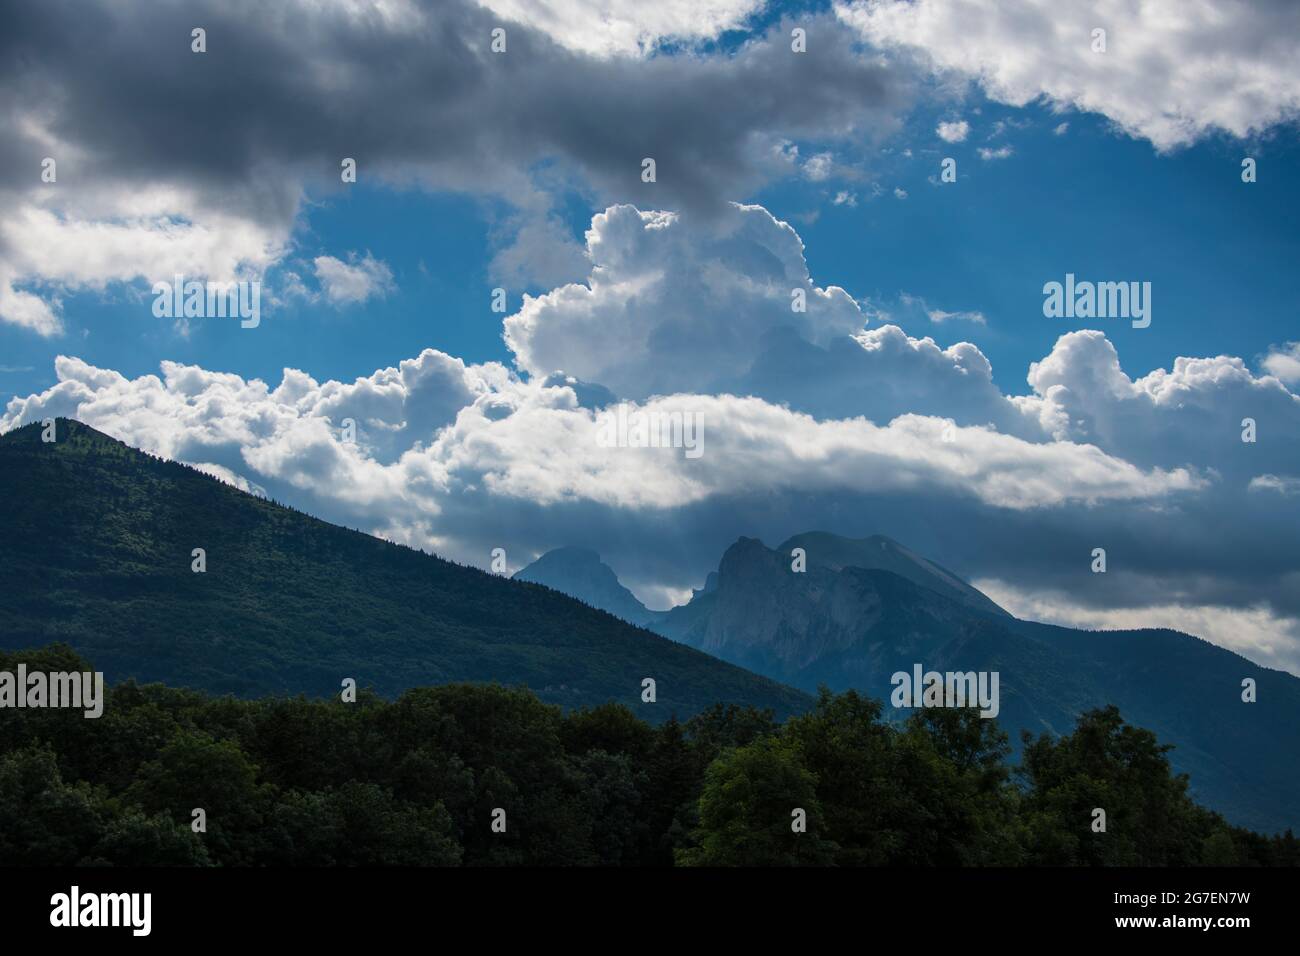 Mountain landscape with mountain peaks, forest and the cloudy blue sky, by stormy weather Stock Photo